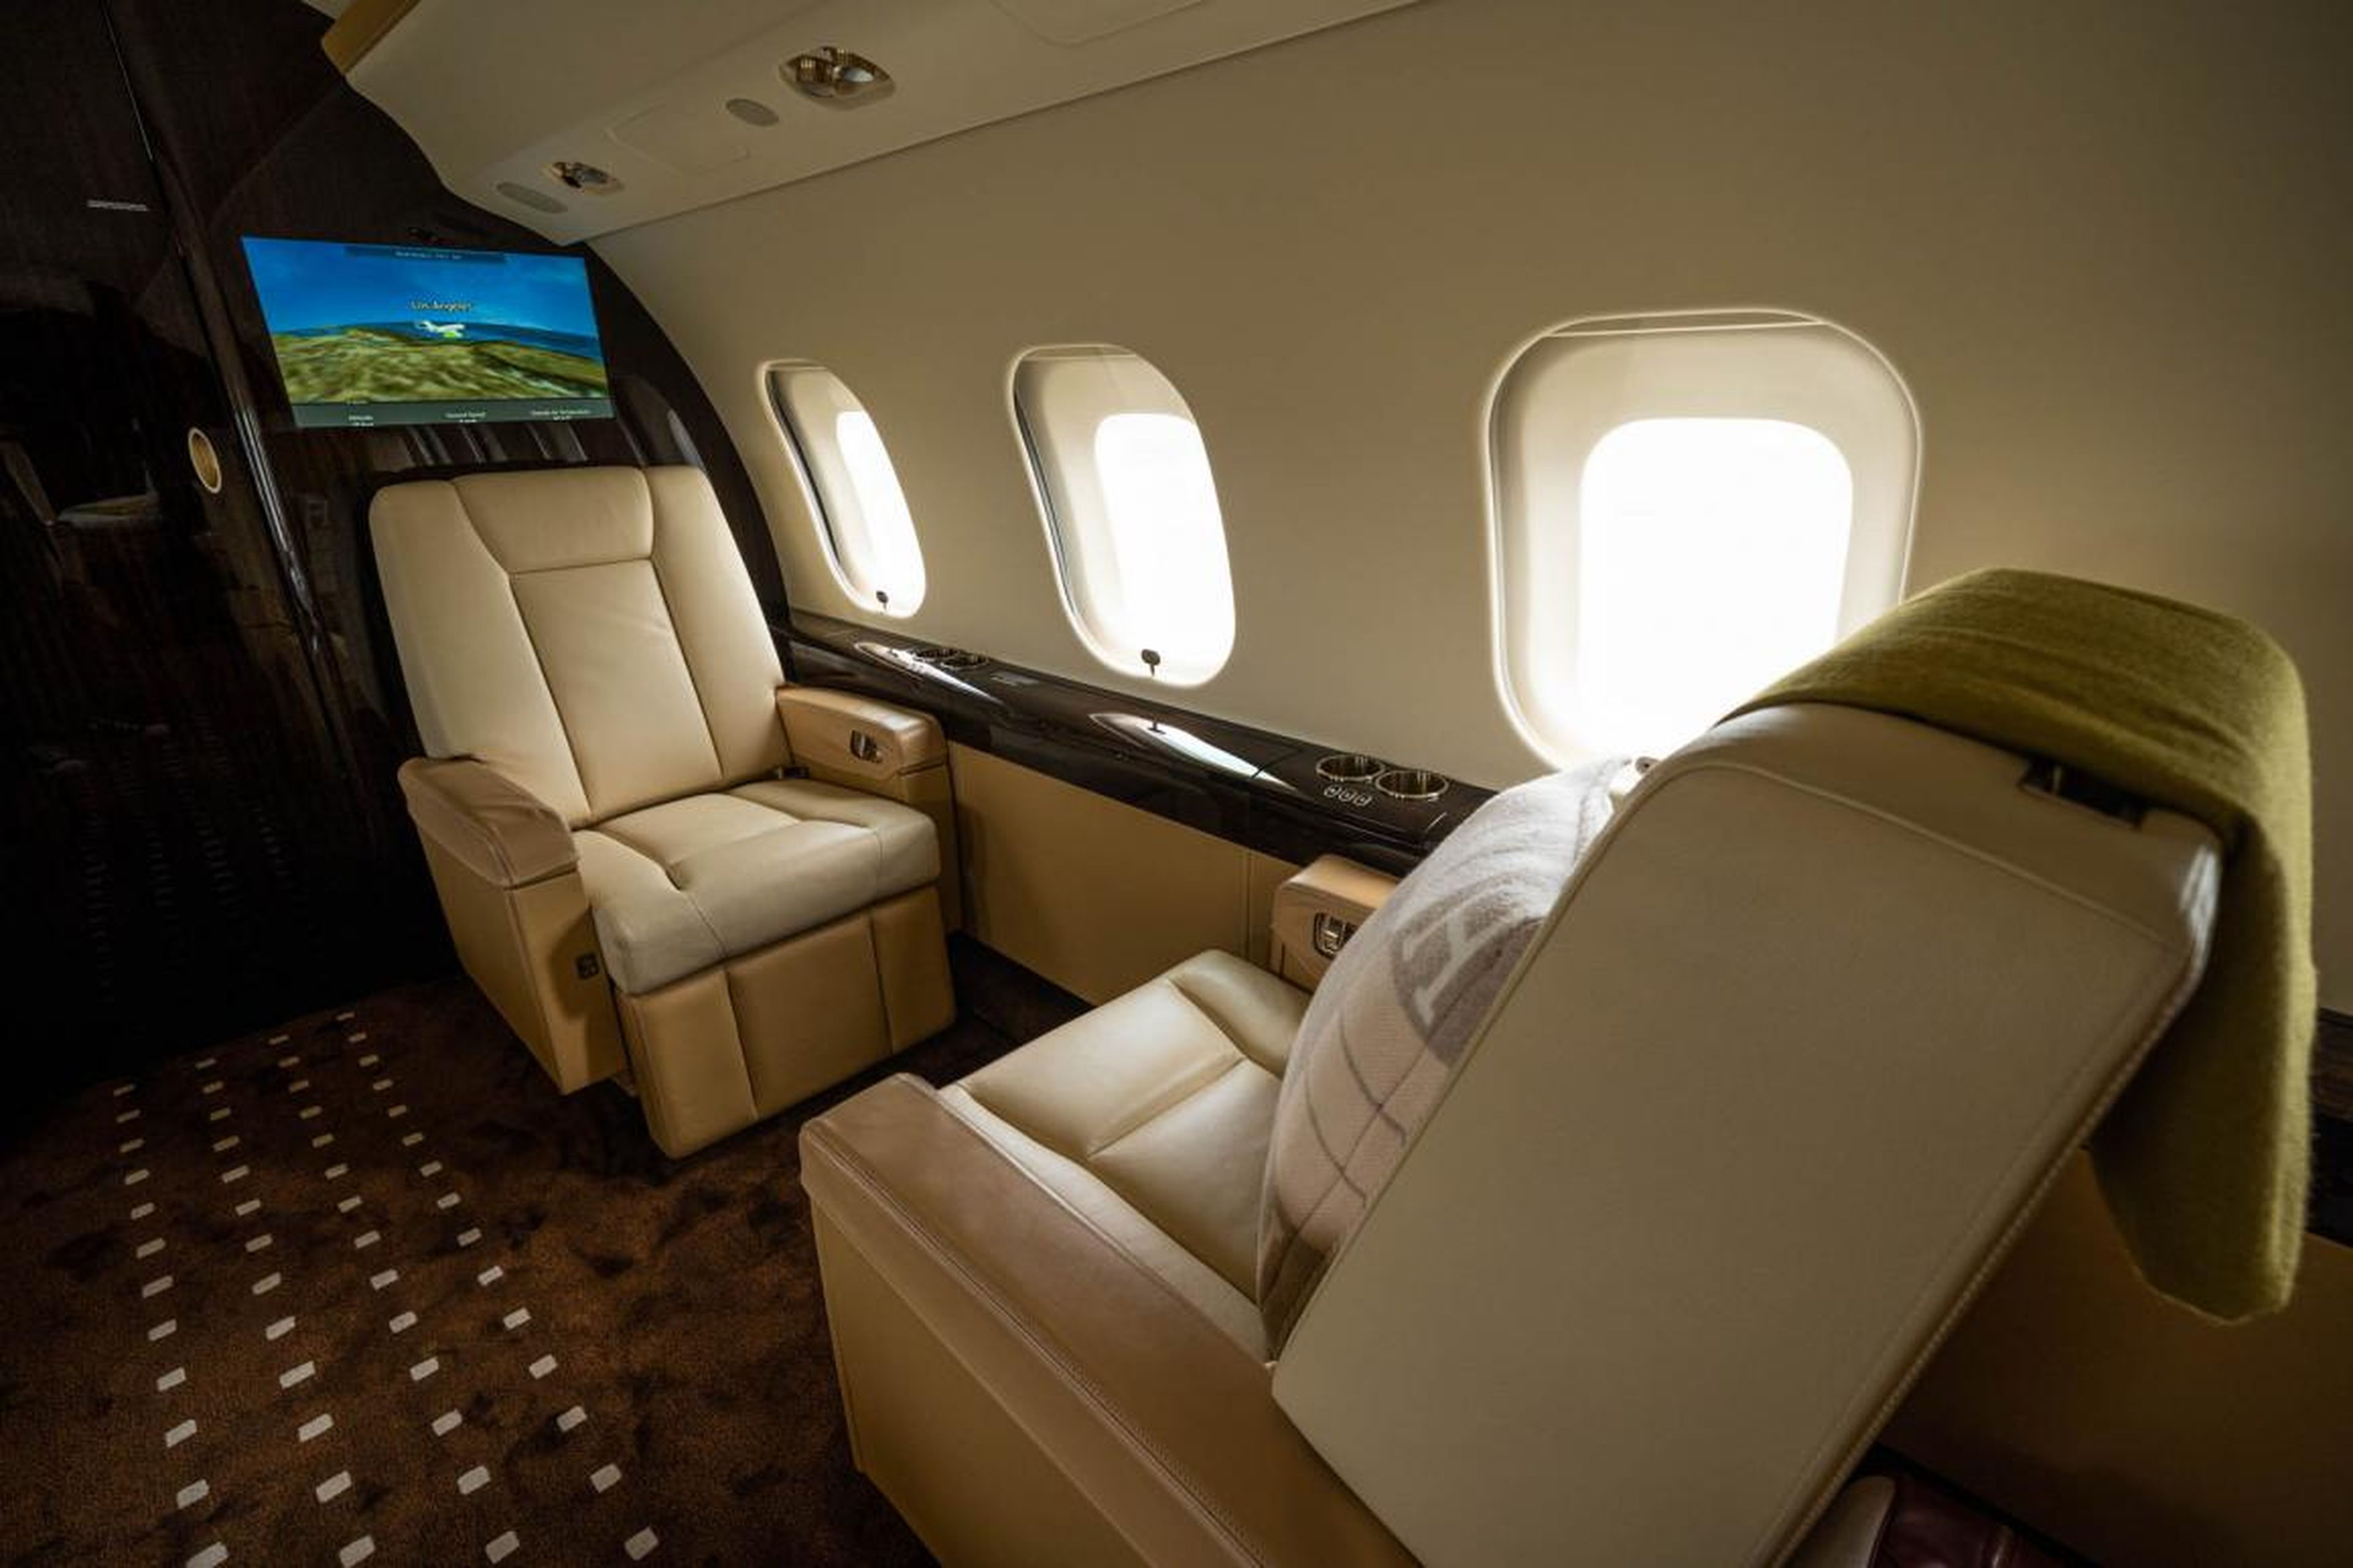 The Global 6000 has a number of features to help passengers stay comfortable.